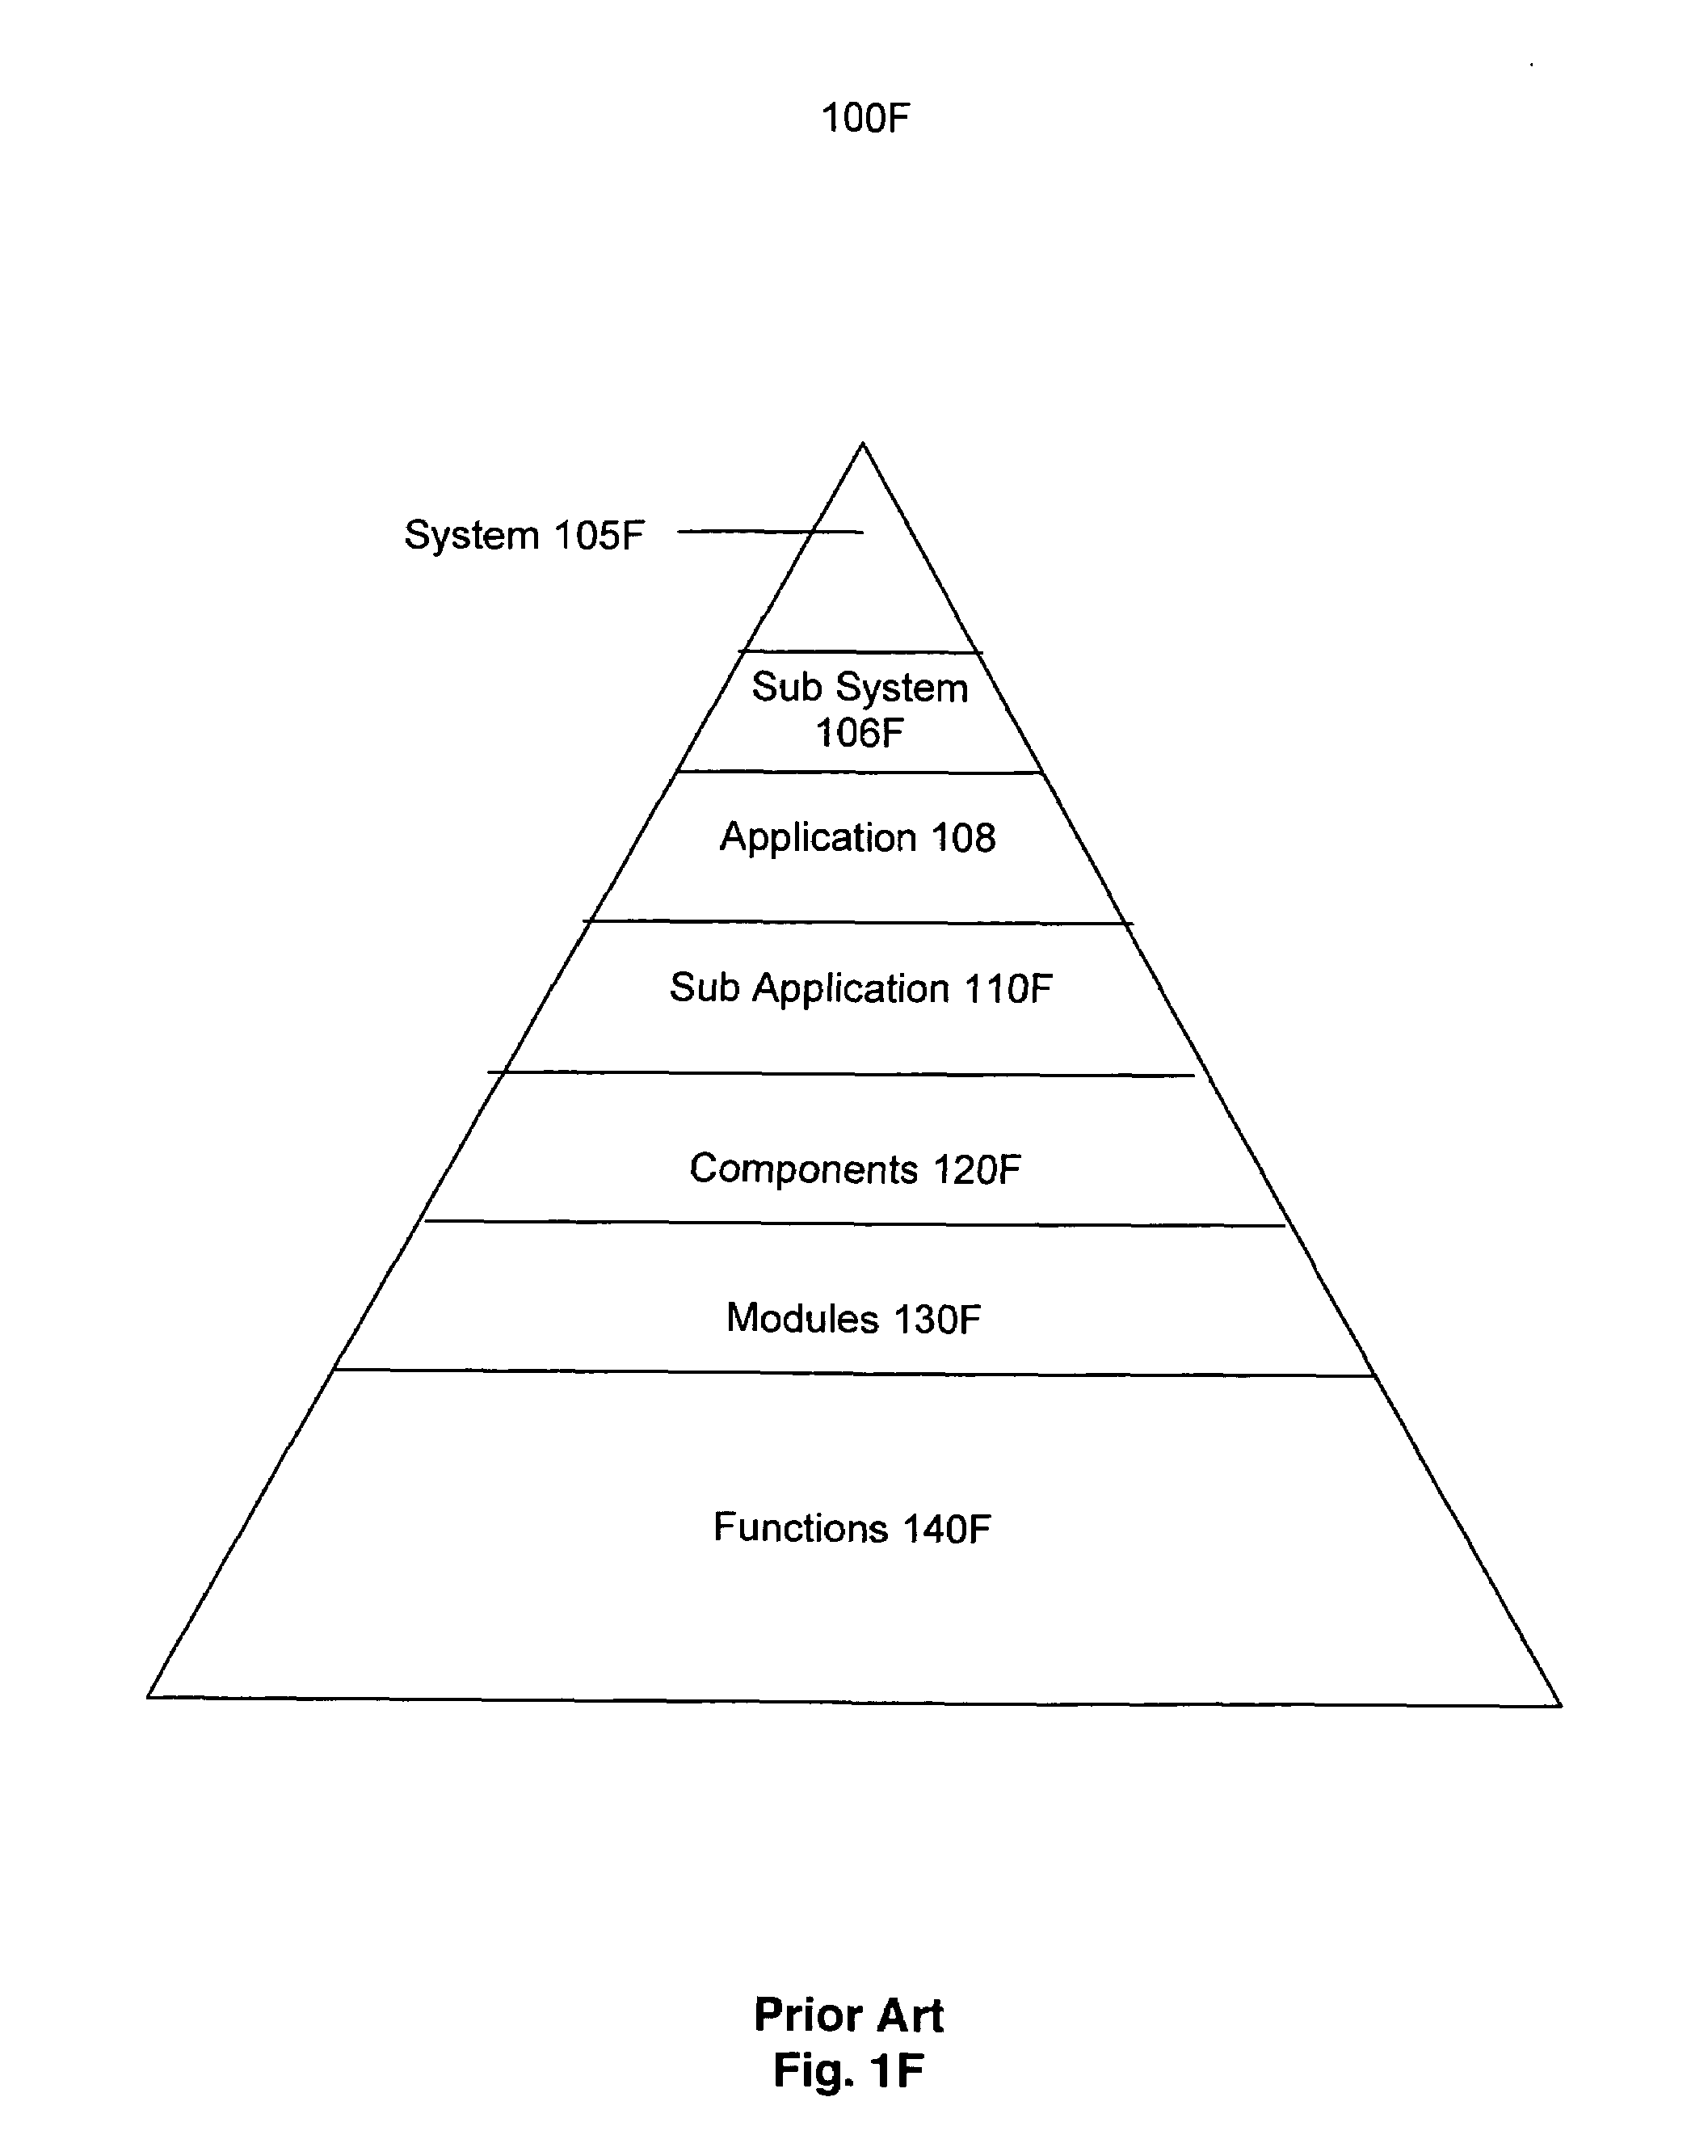 Method and system for deploying an asset over a multi-tiered network